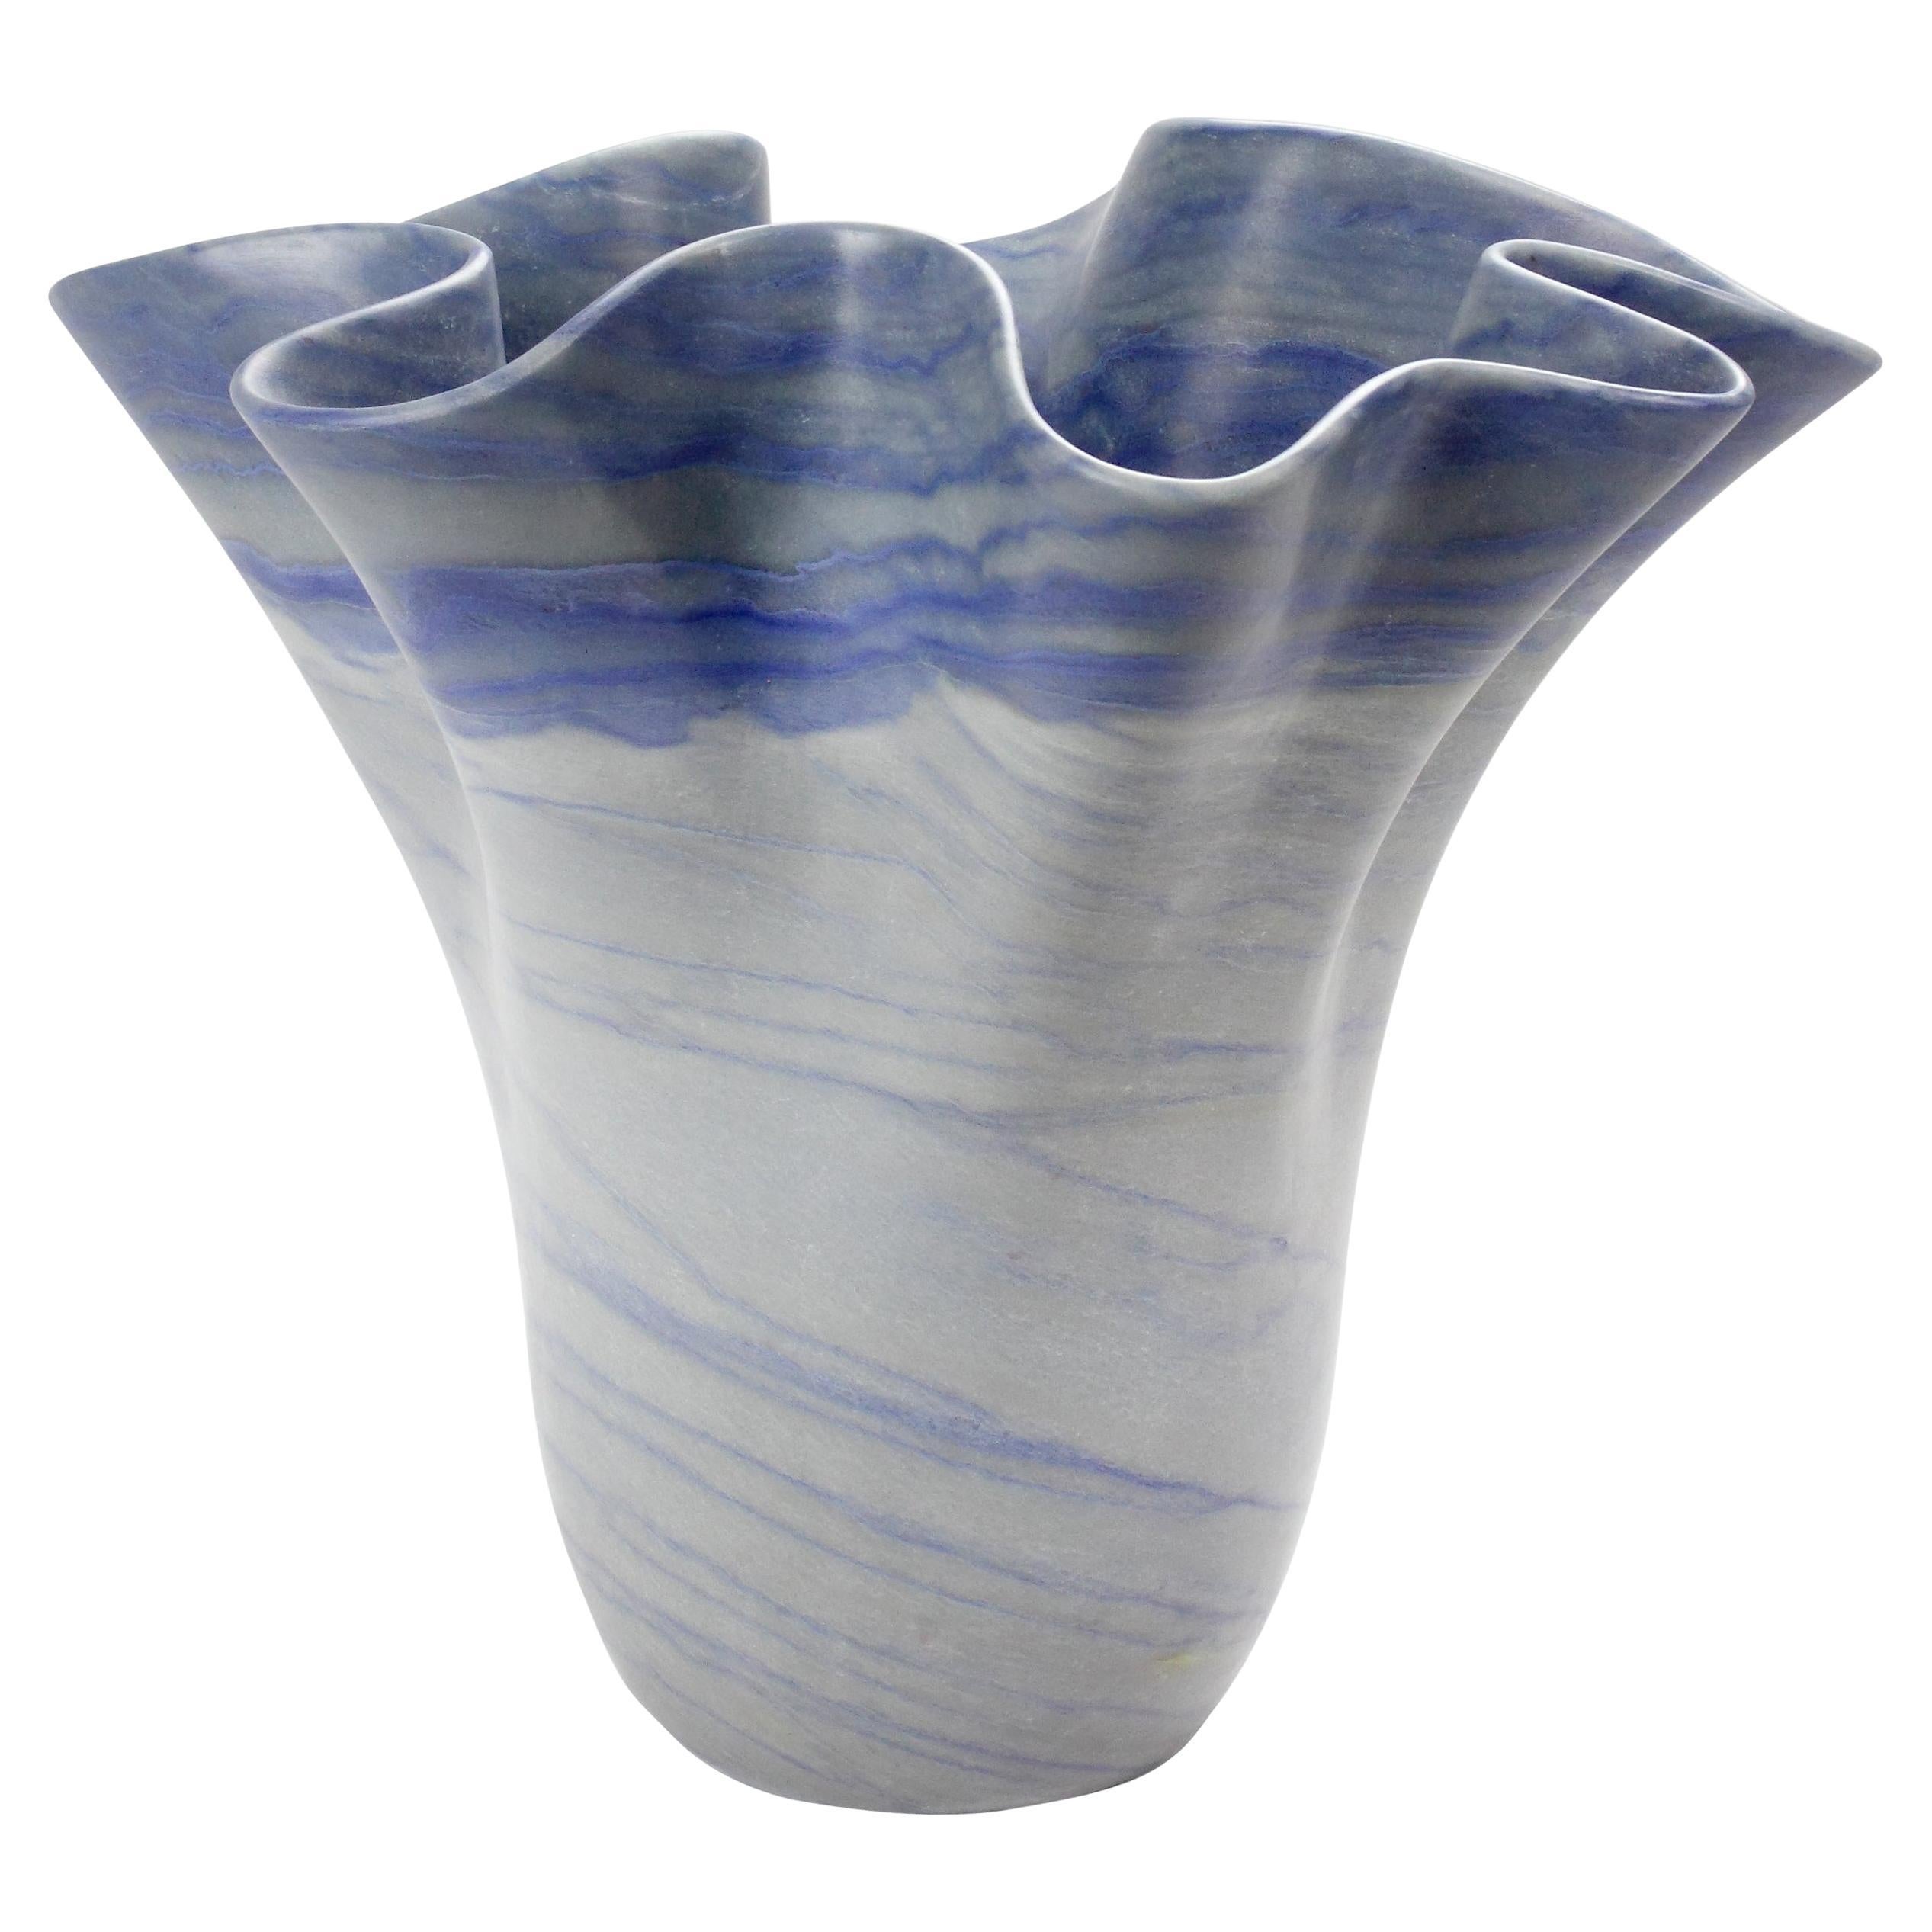 Vase Vessel Sculpture Organic Shape Solid Block Blue Azul Marble Collectible For Sale